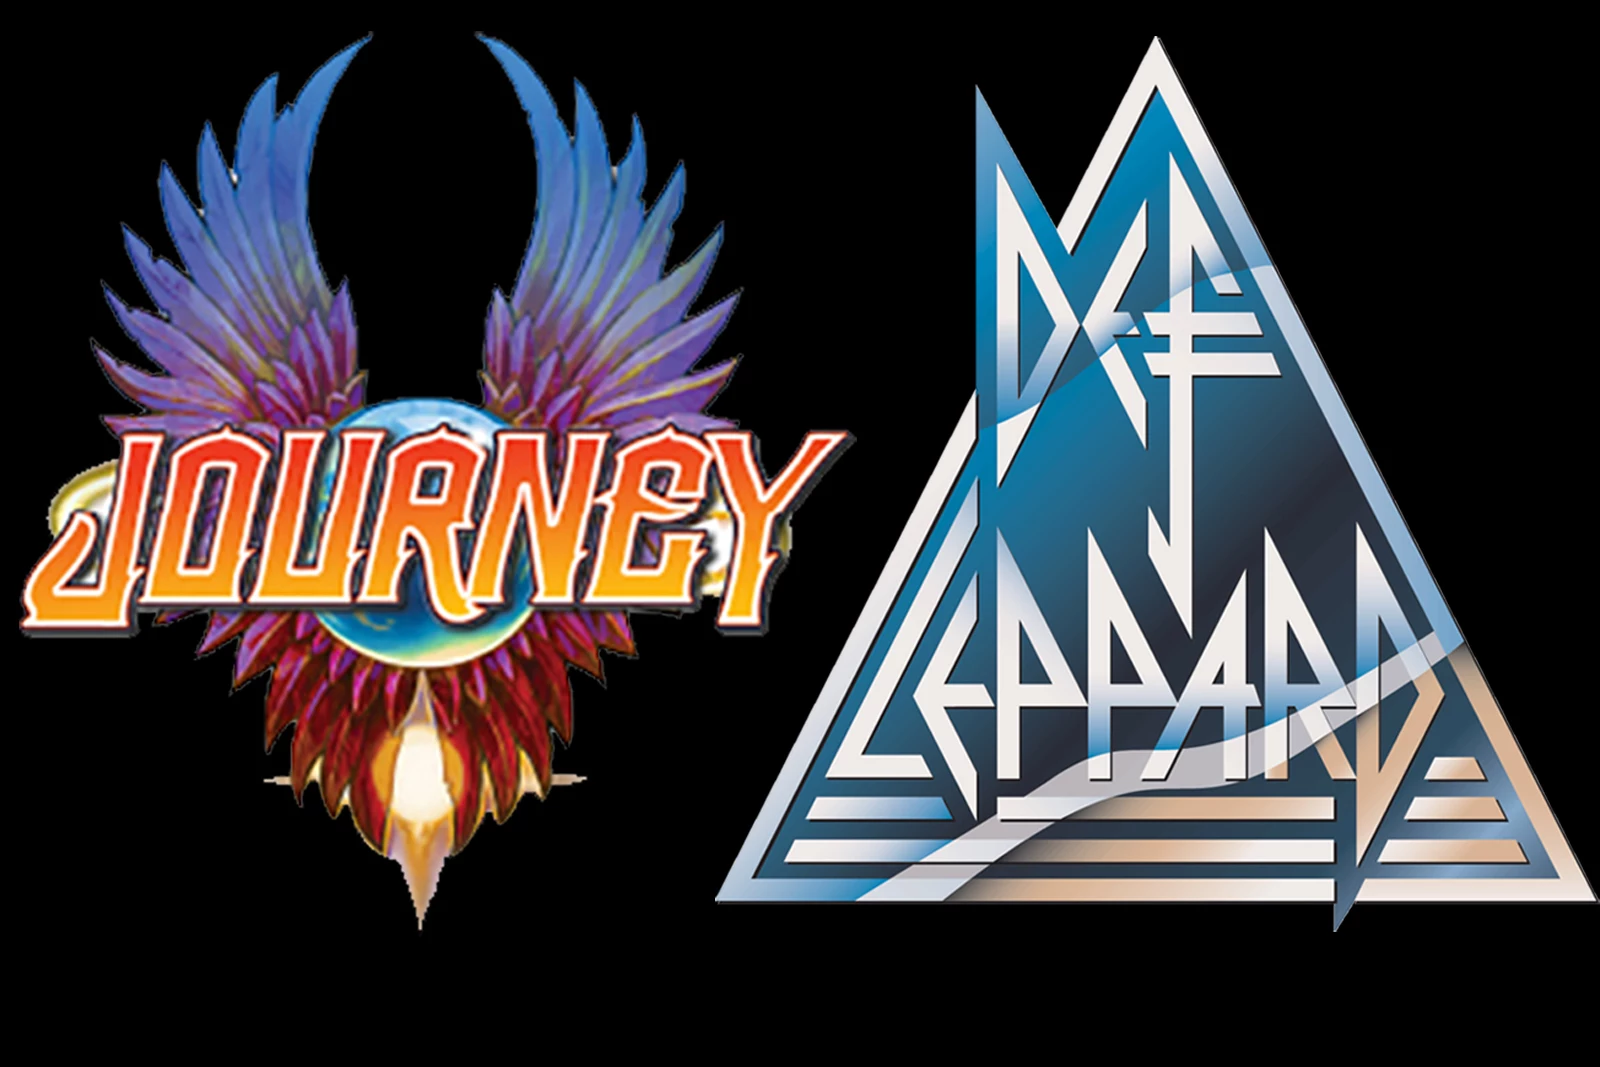 Def Leppard and Journey